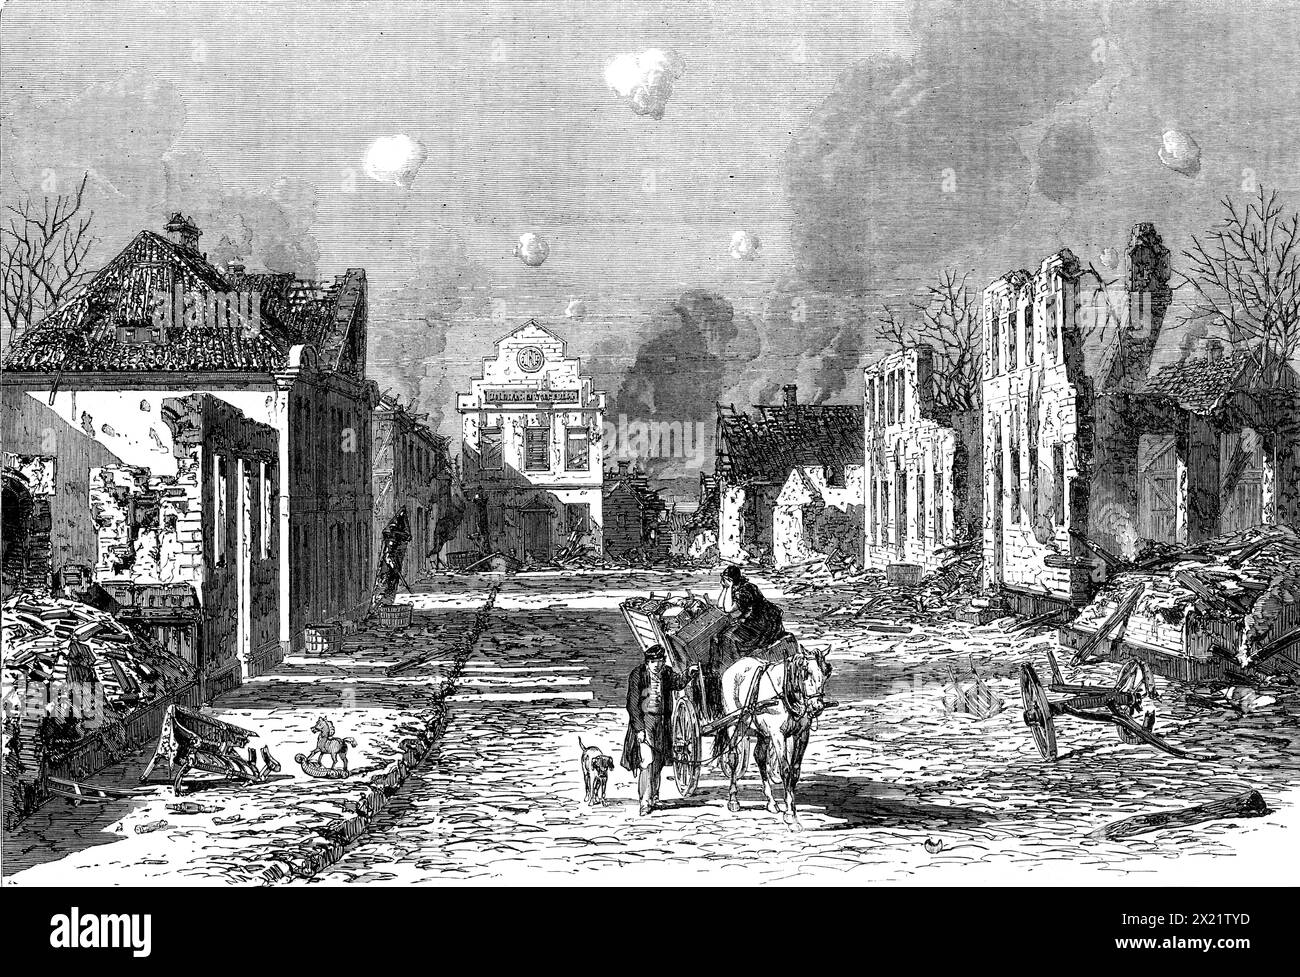 The War in Denmark: the town of Sonderburg in ruins after the bombardment, 1864. Engraving '...from a sketch taken by Mr. Simonsen, our Danish Artist, in the town of Sonderburg a fortnight after its bombardment - that cruel and wanton act, for which, as Earl Russell has observed, &quot;the Prussian army must remain under the reprobation of all civilised countries.&quot; The view which is here presented shows what damage was caused to the houses by the enemy's shells falling in the little square of Sonderburg, near the newly-built Townhall. But it must be left to the imagination to conceive the Stock Photo